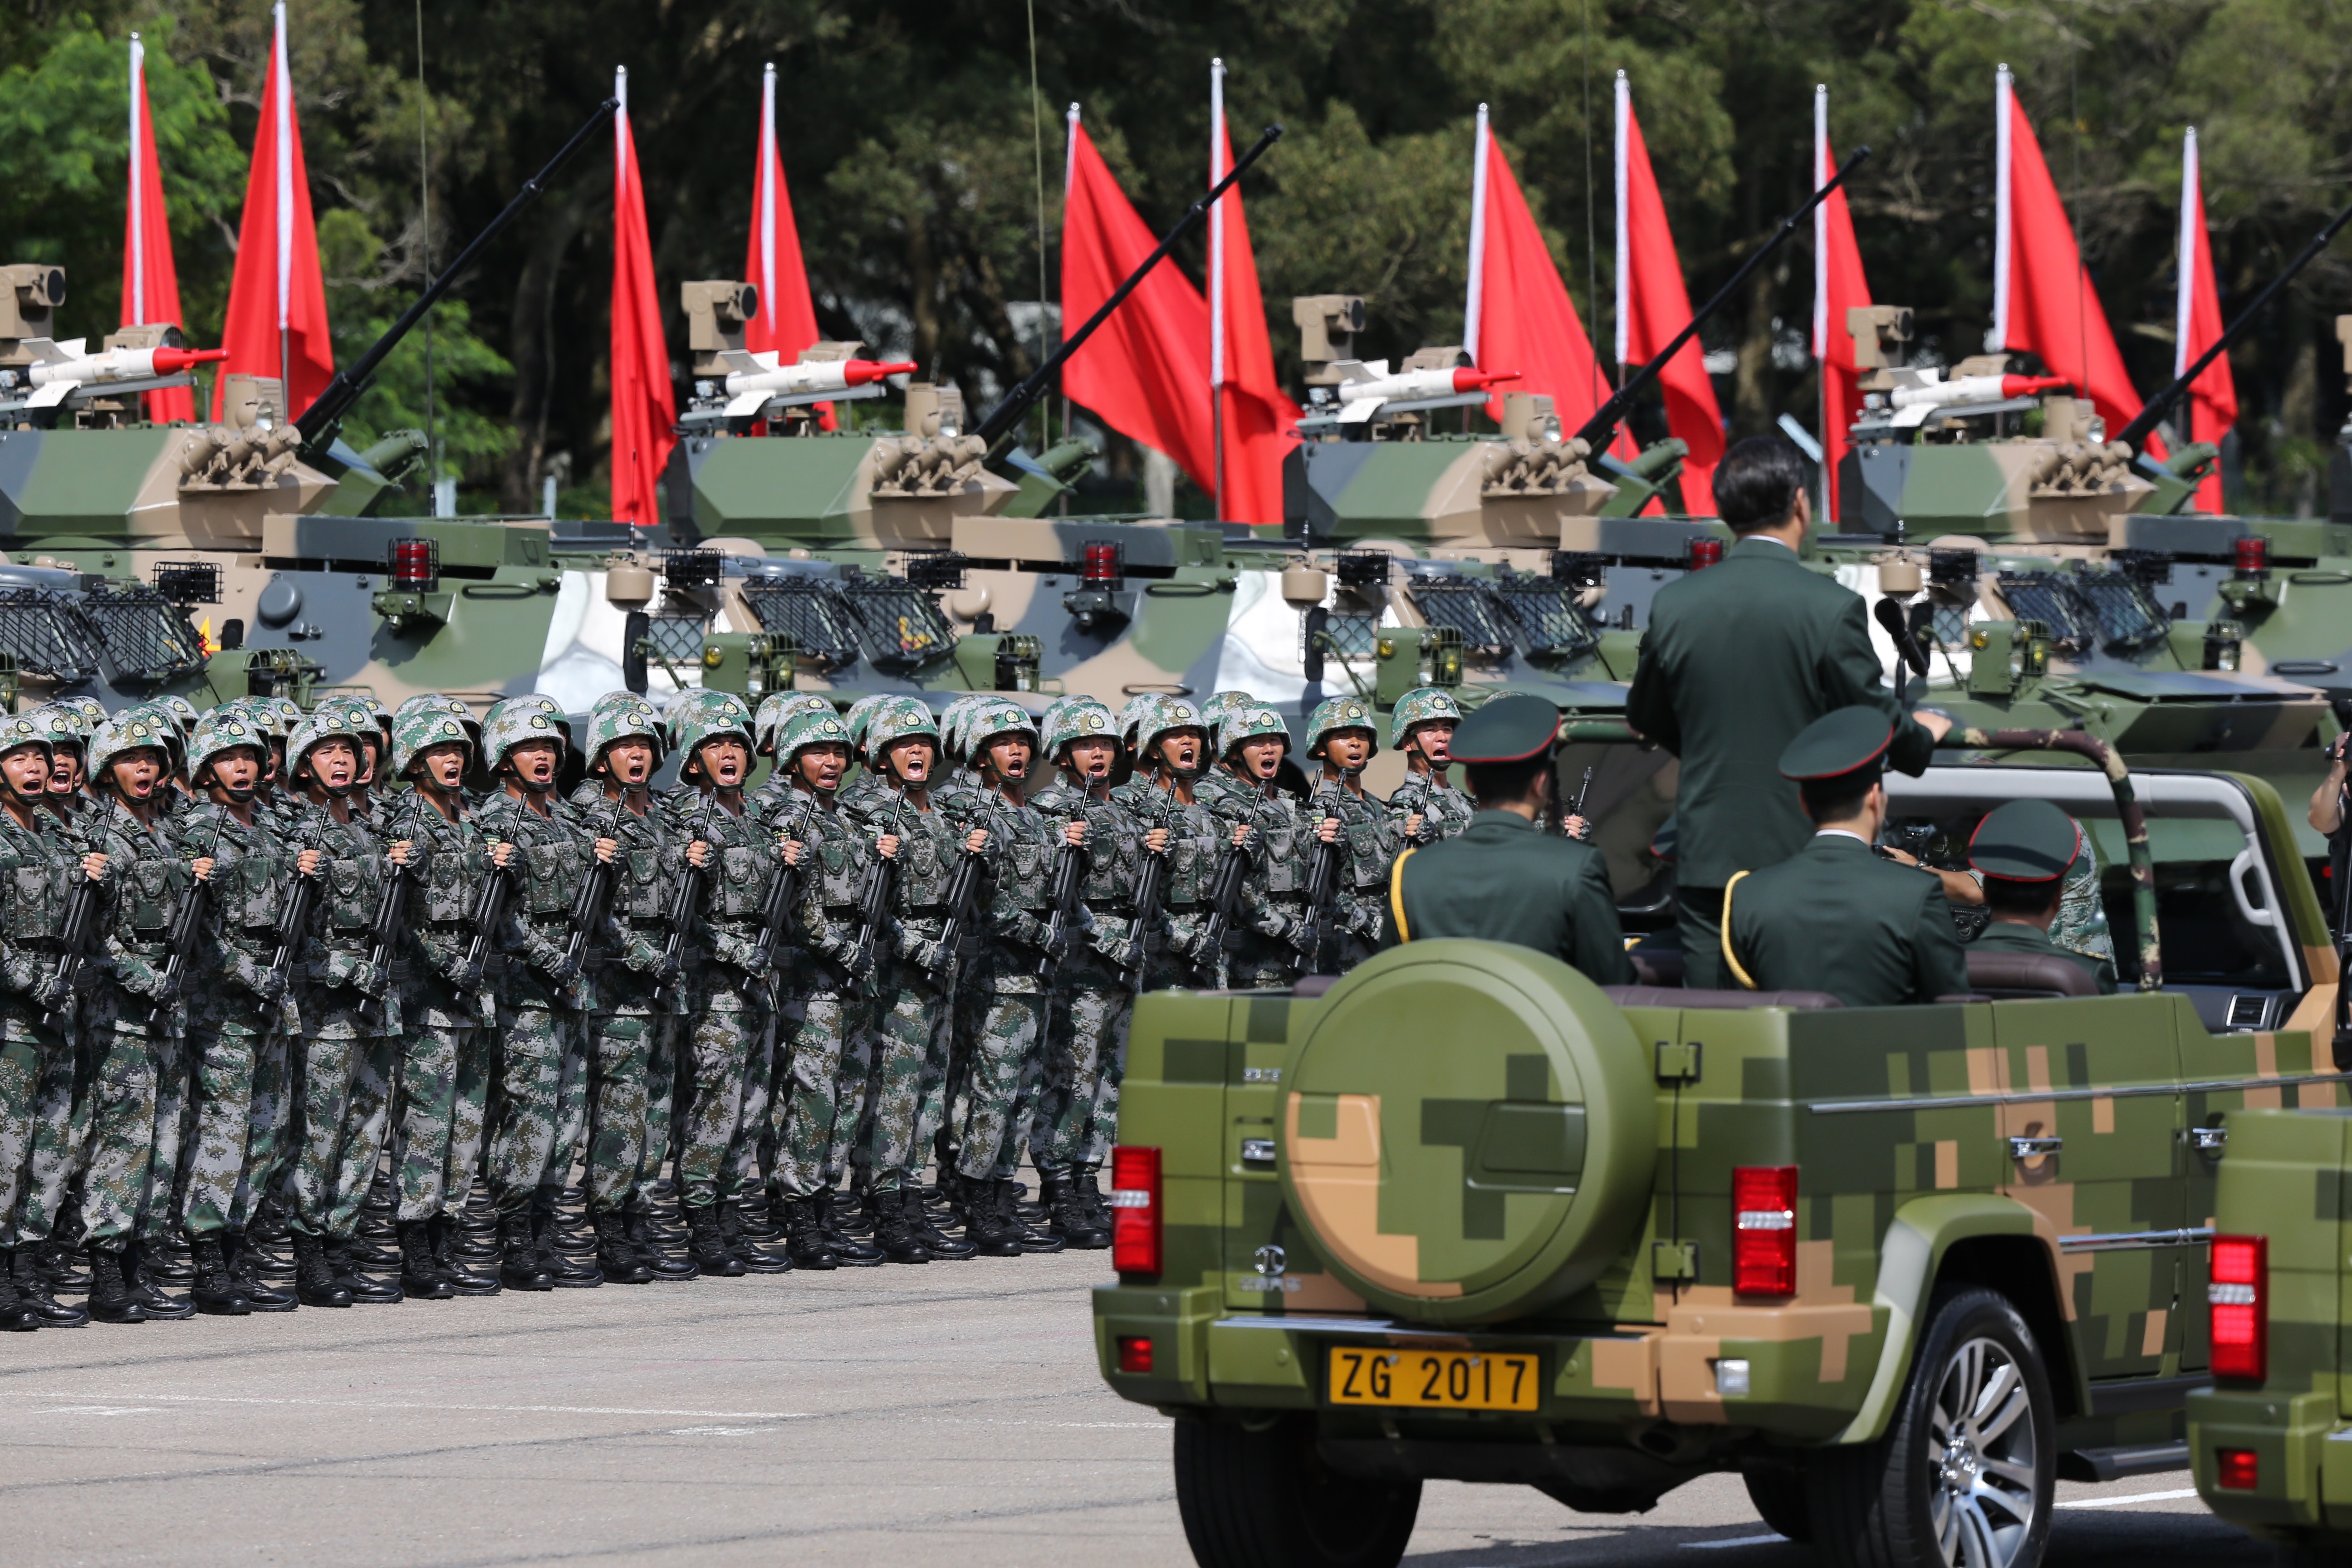 President Xi inspected the People's Liberation Army garrison in Hong Kong on Friday. Photo: Sam Tsang